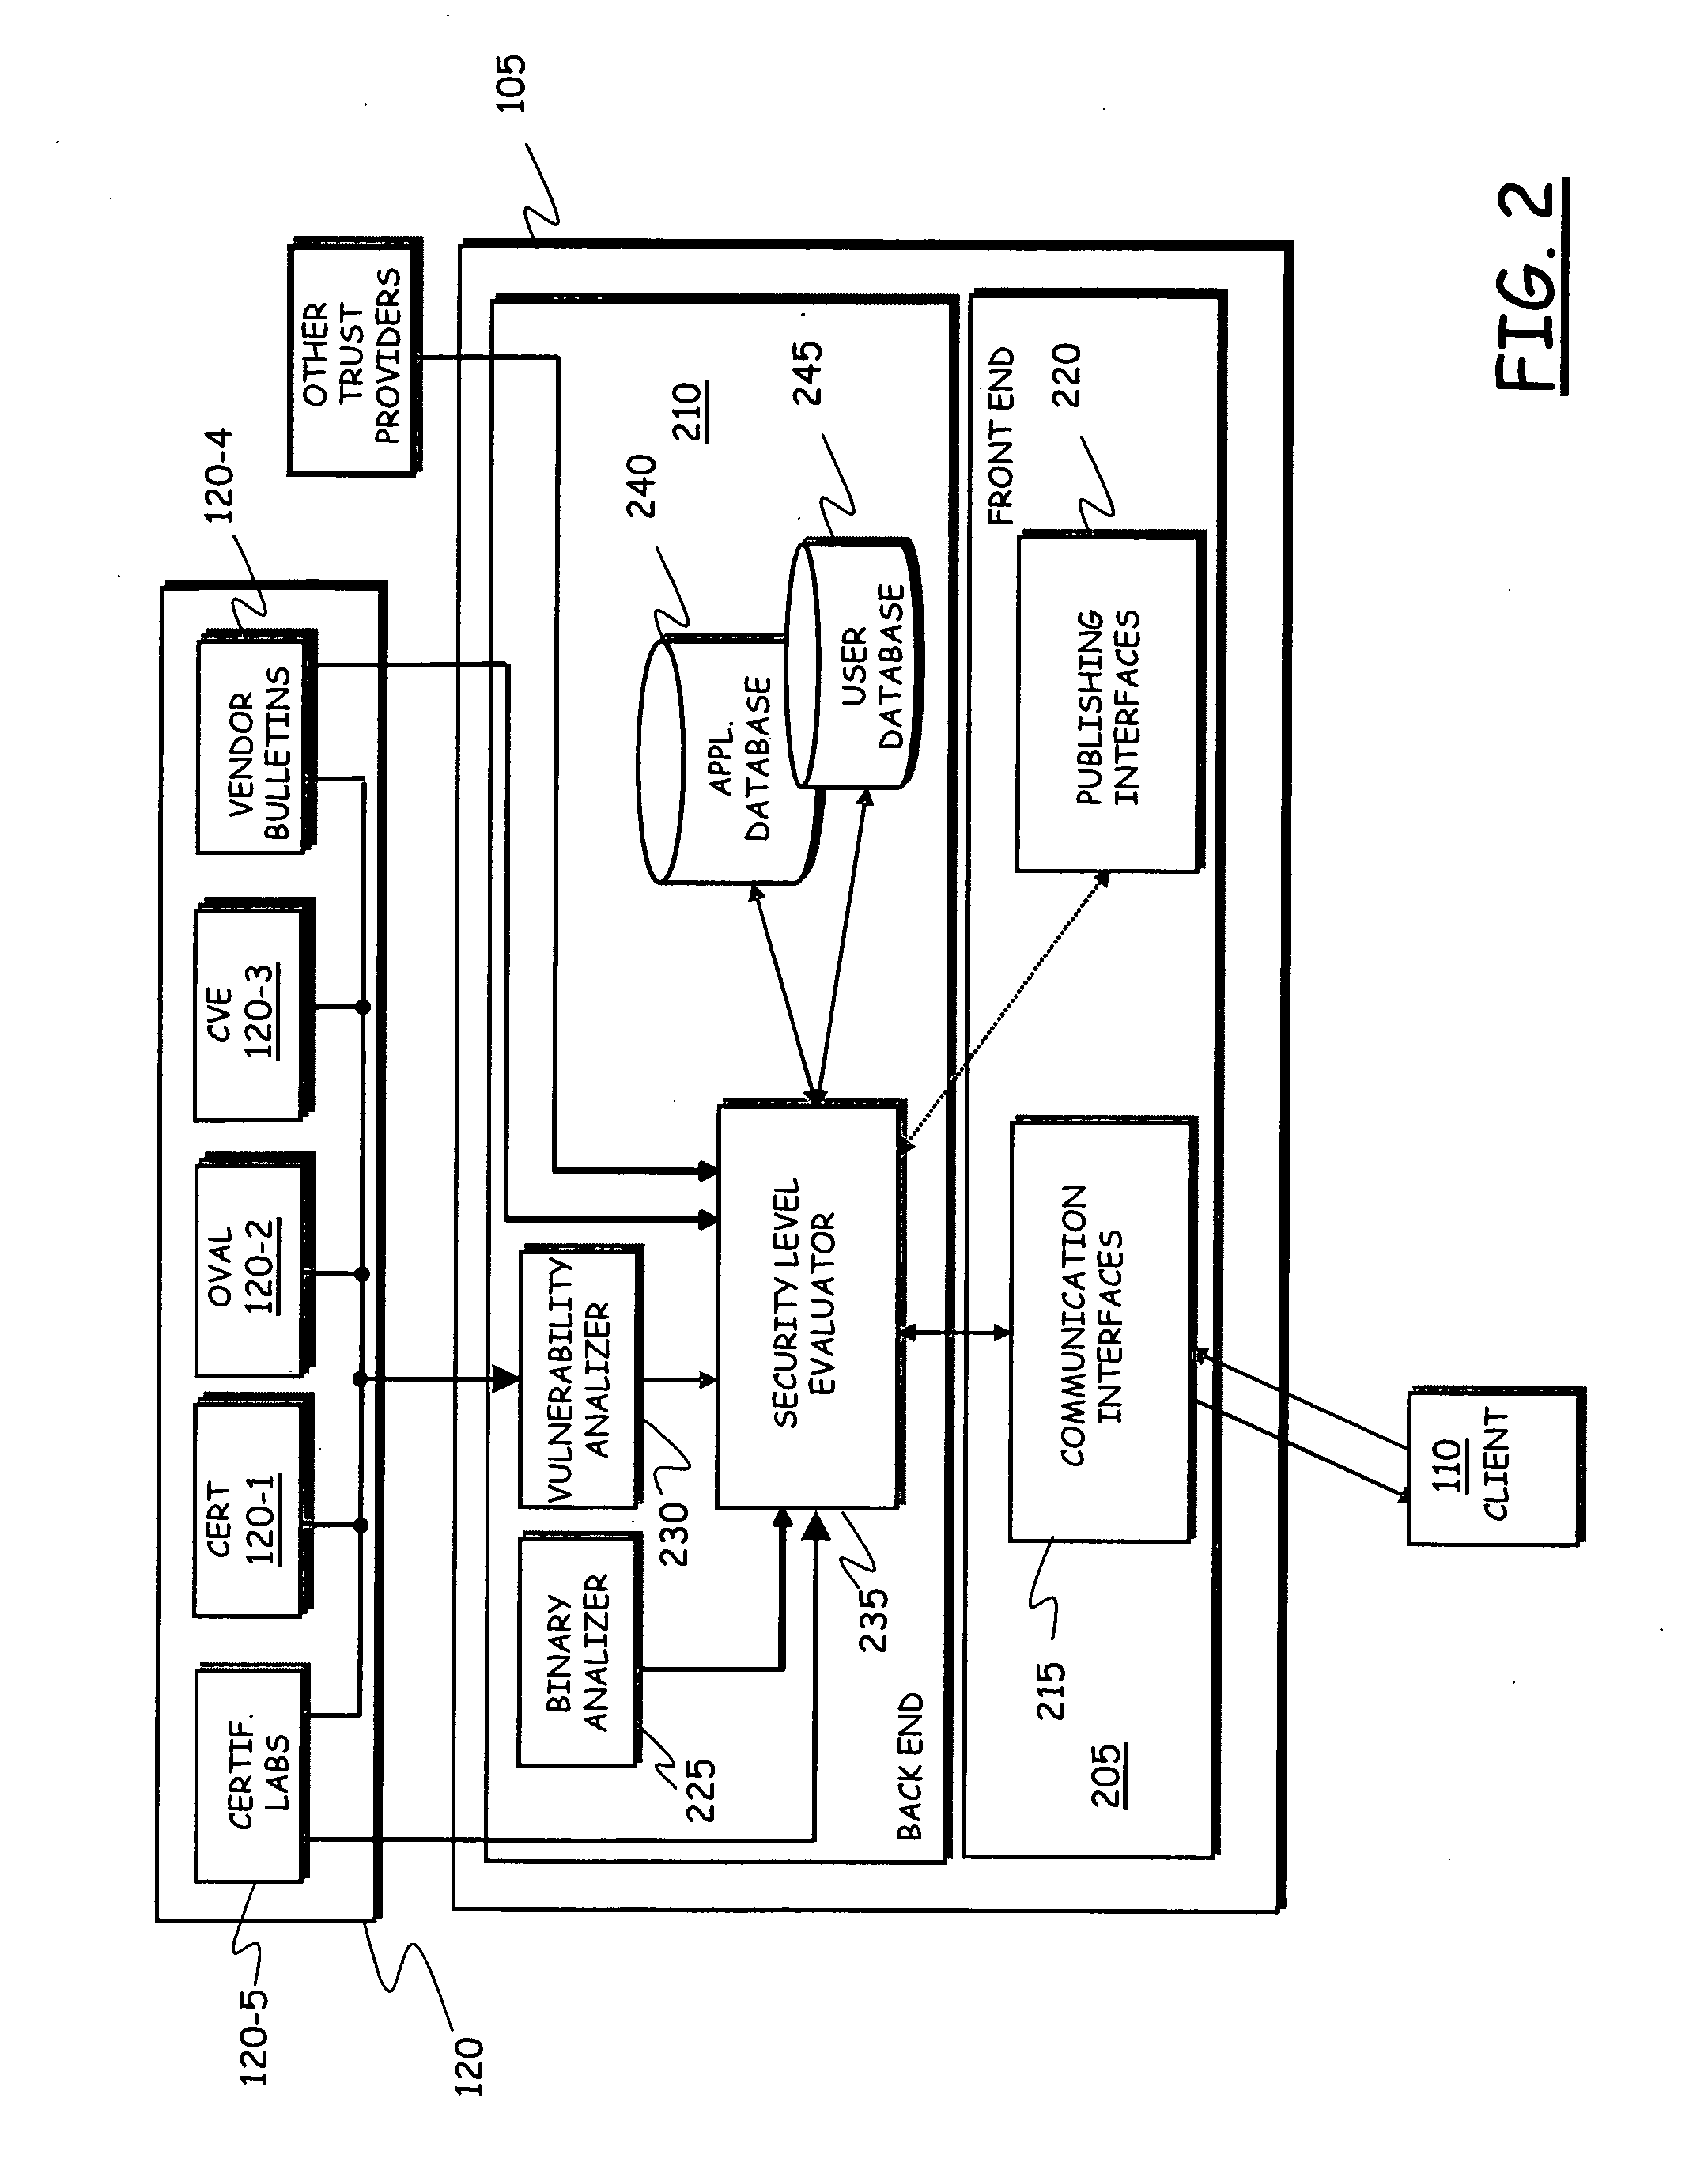 System for implementing security on telecommunications terminals